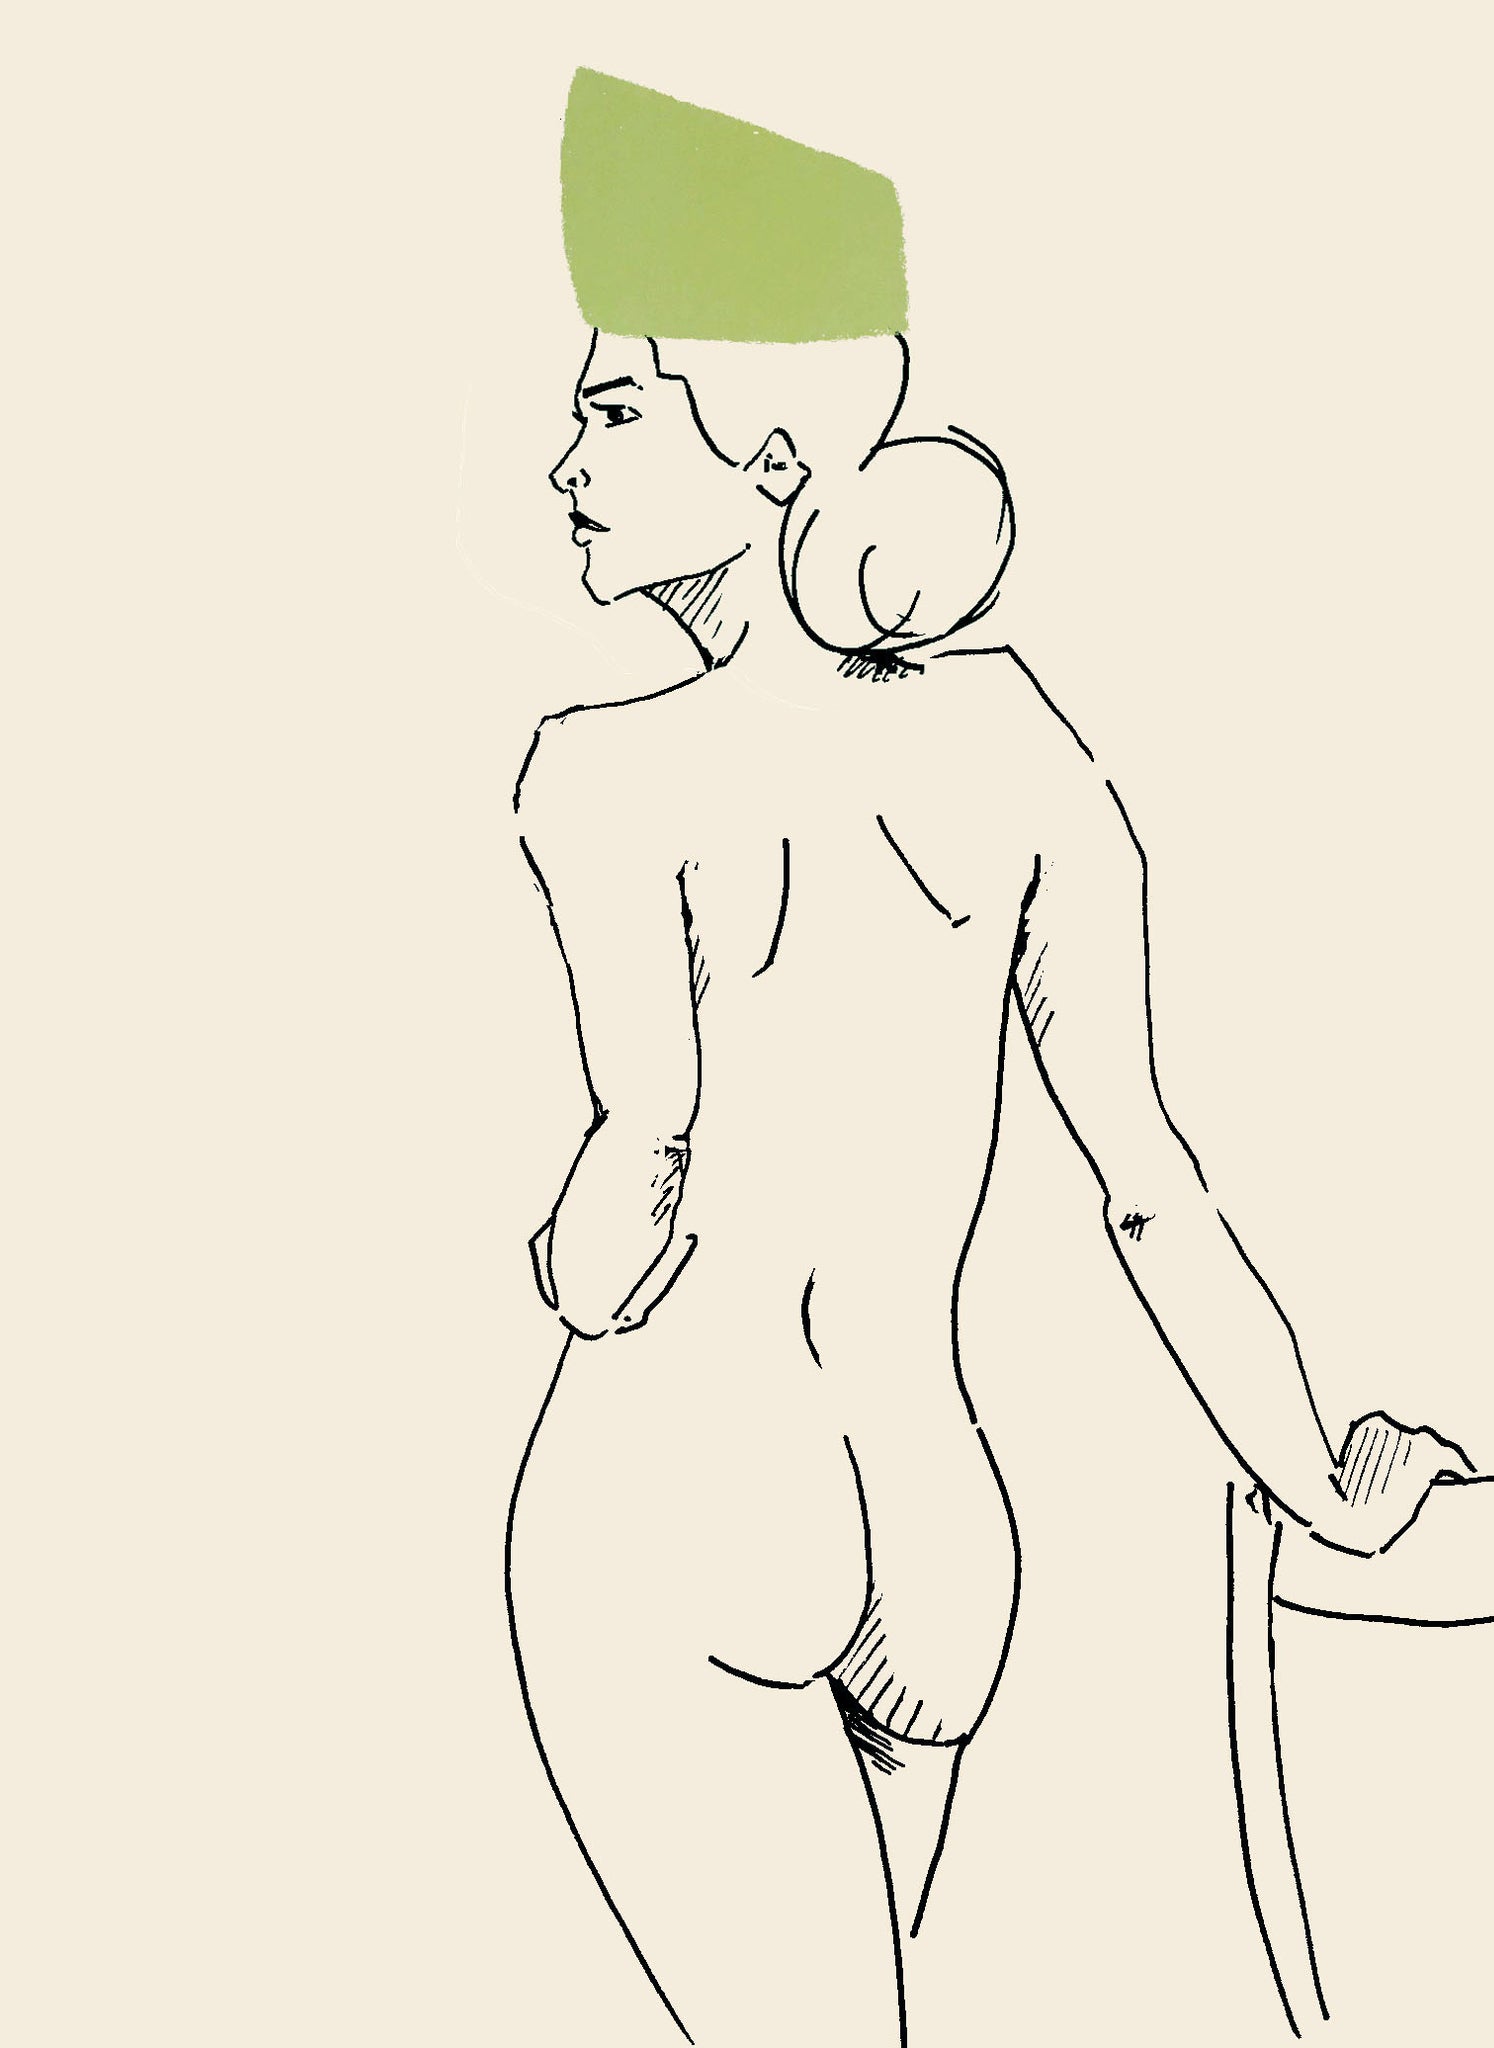 Signup Now For December's Open Figure Drawing Session